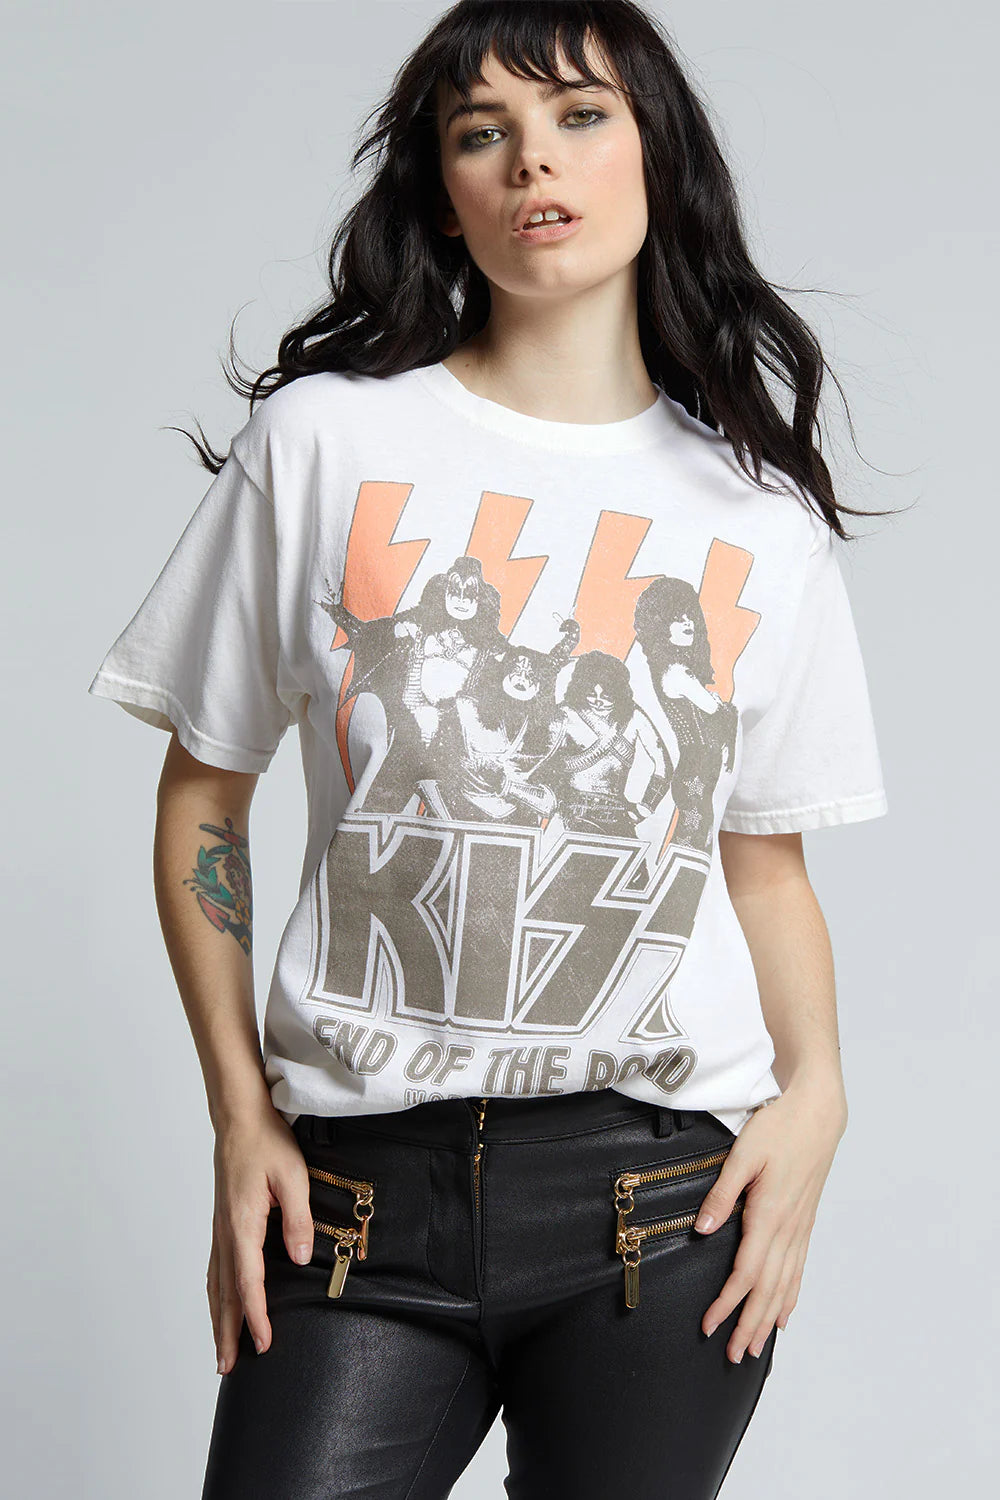 KISS End Of The Road Tour Unisex Tee